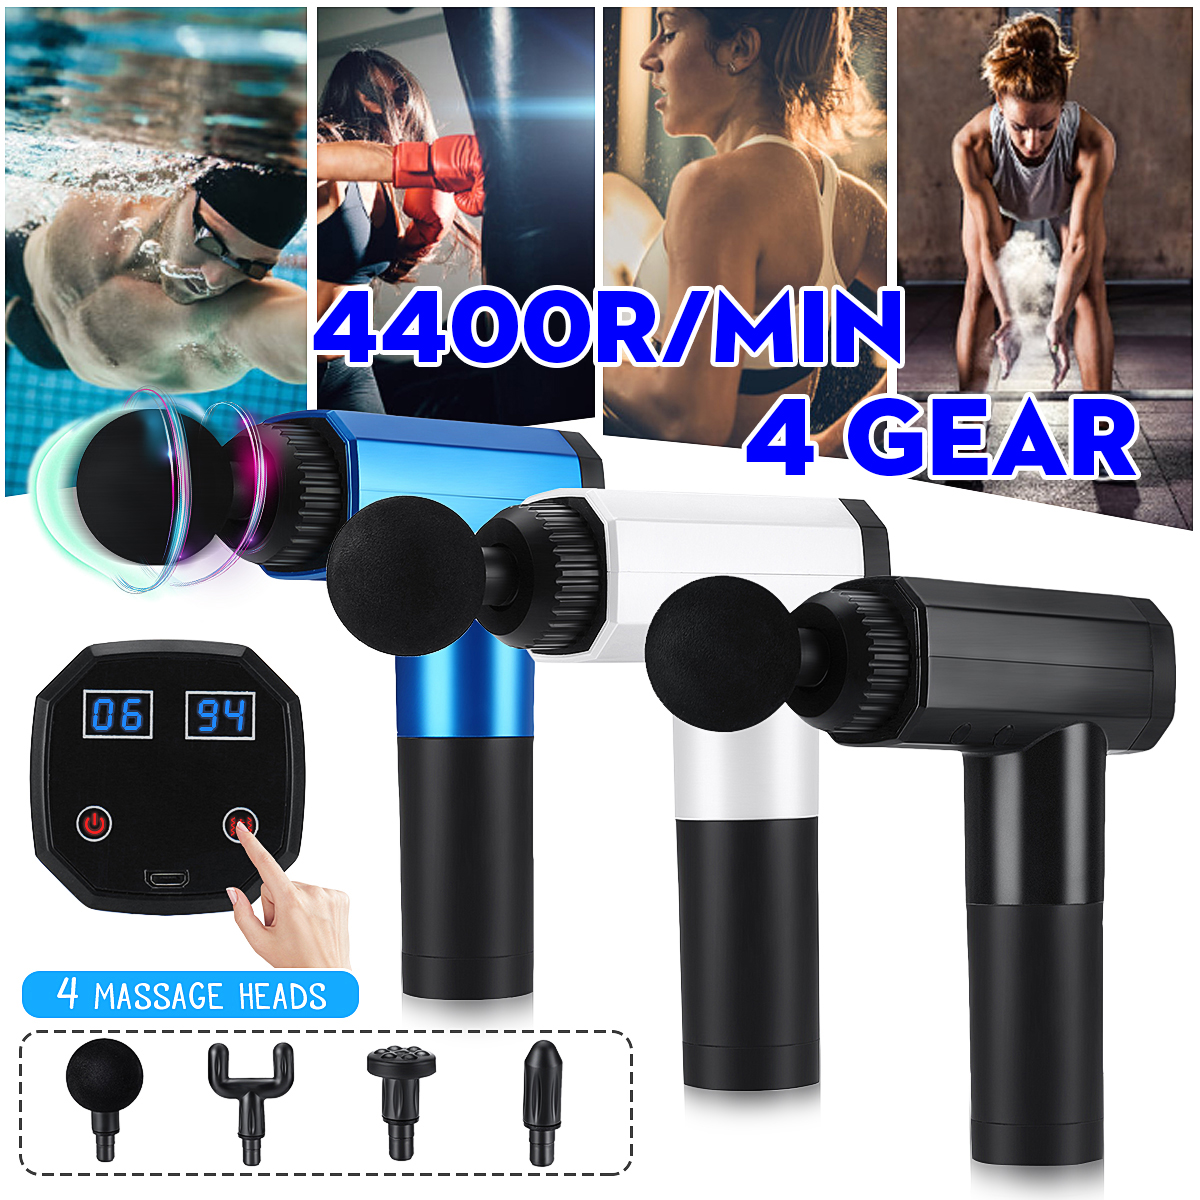 80W-Smart-Touch-LED-Electric-Percussive-Massager-4-Gears-USB-Rechargeable-Deep-Muscle-Shock-Vibratio-1693756-1